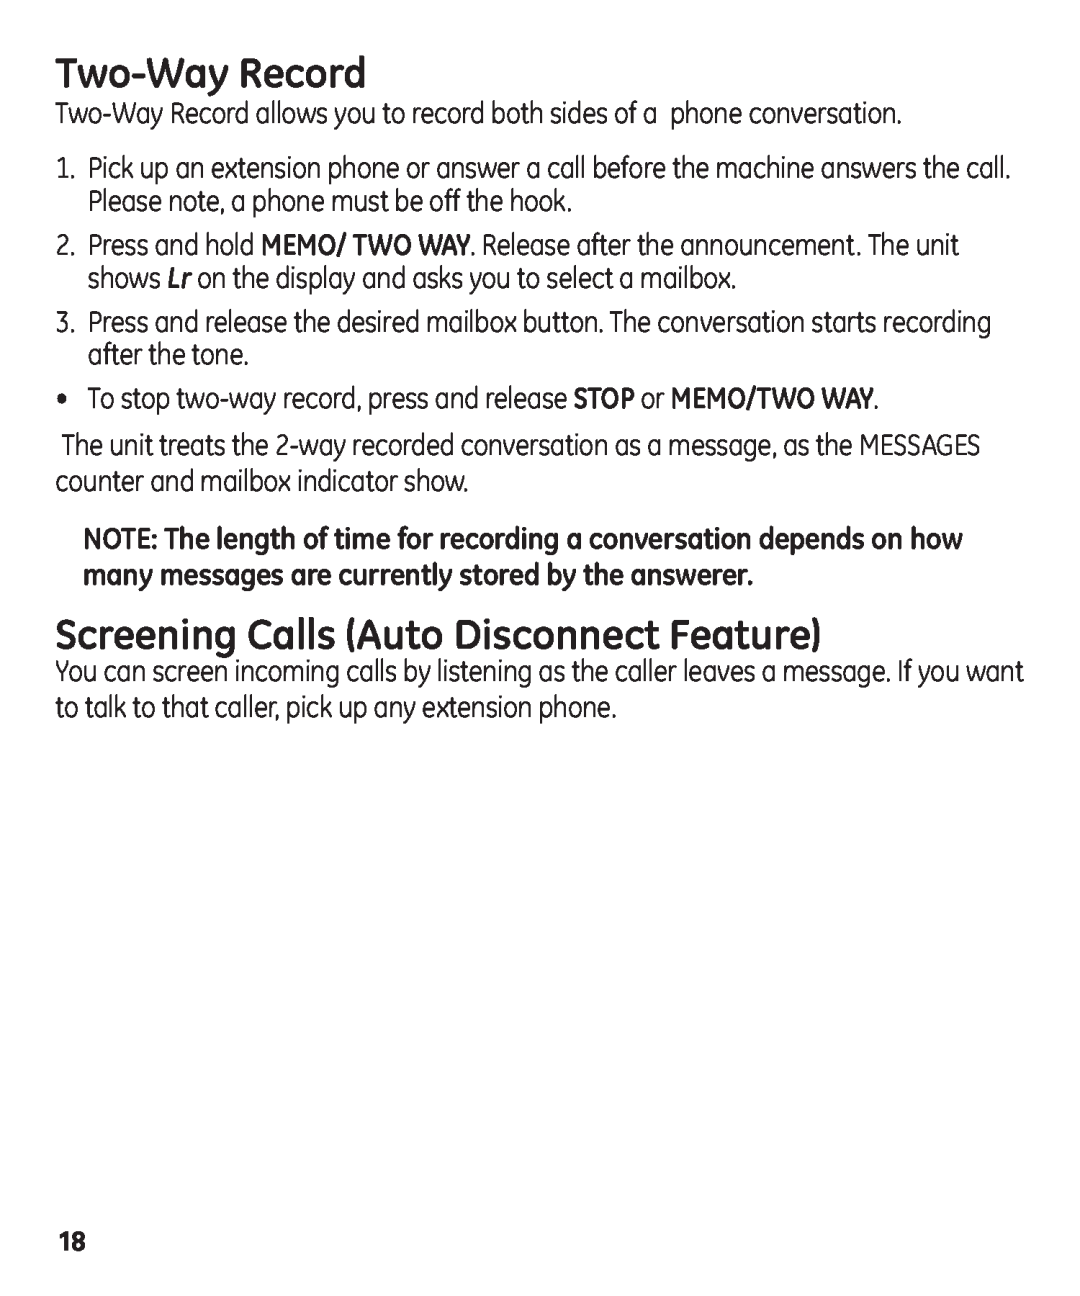 GE 29861 manual Two-Way Record, Screening Calls Auto Disconnect Feature 